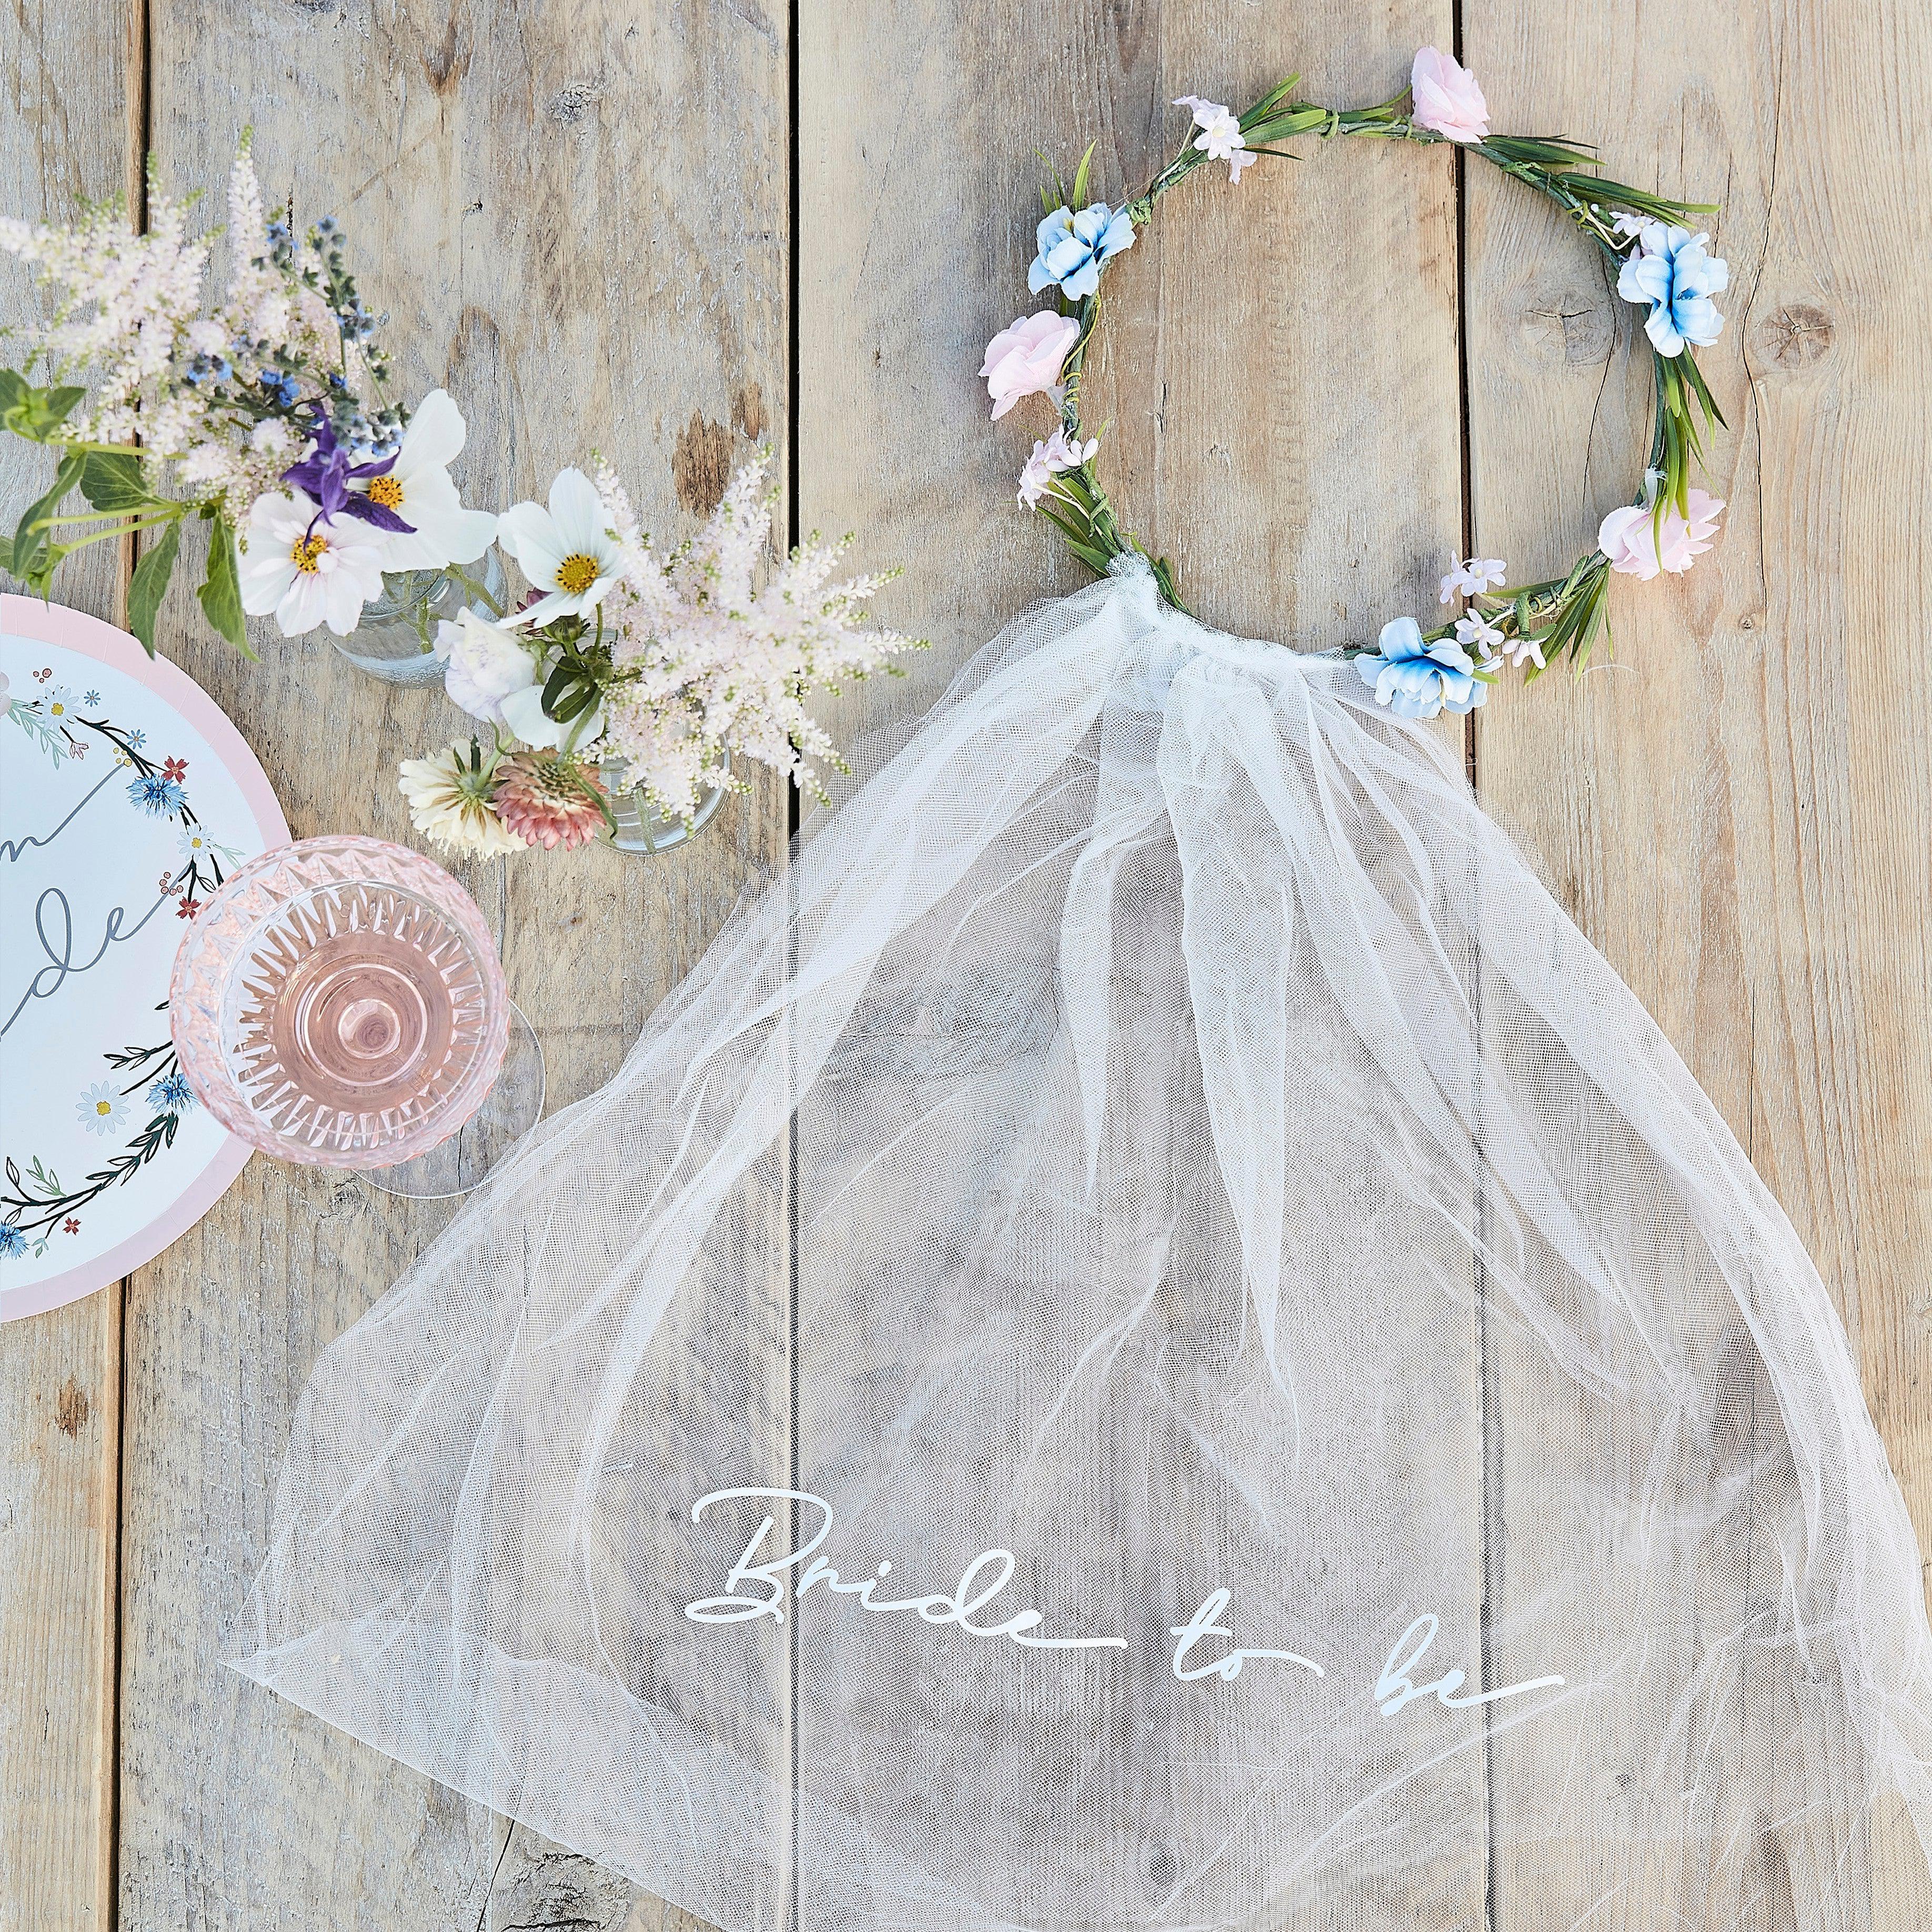 Boho Bride To Be Hen Party Veil with Floral Crown Ginger Ray